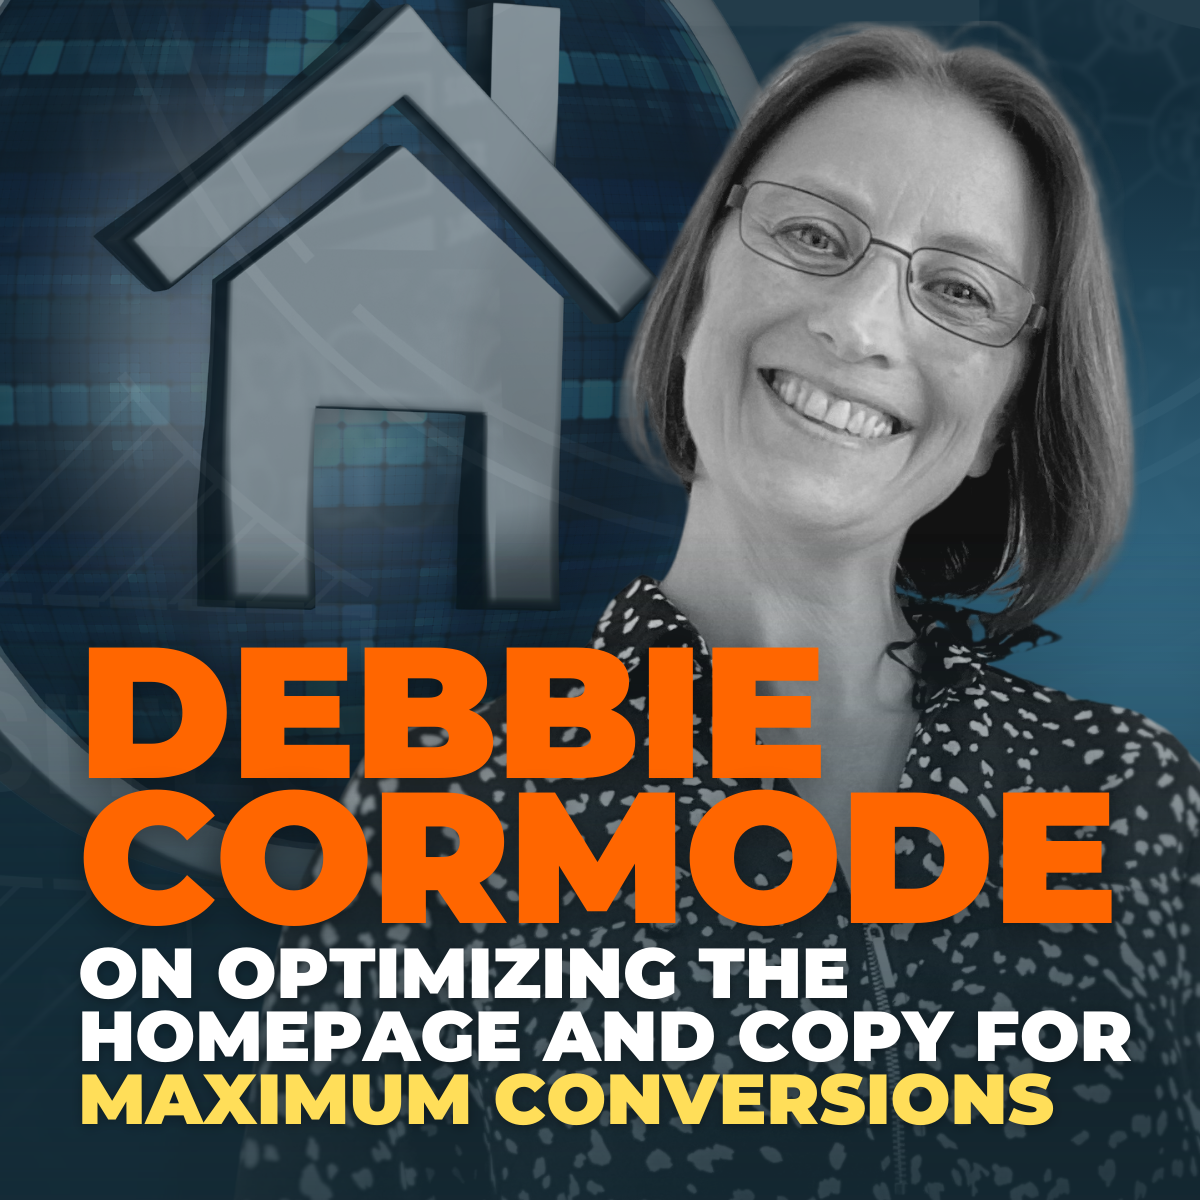 Debbie Cormode on optimizing the homepage and copy for maximum conversions